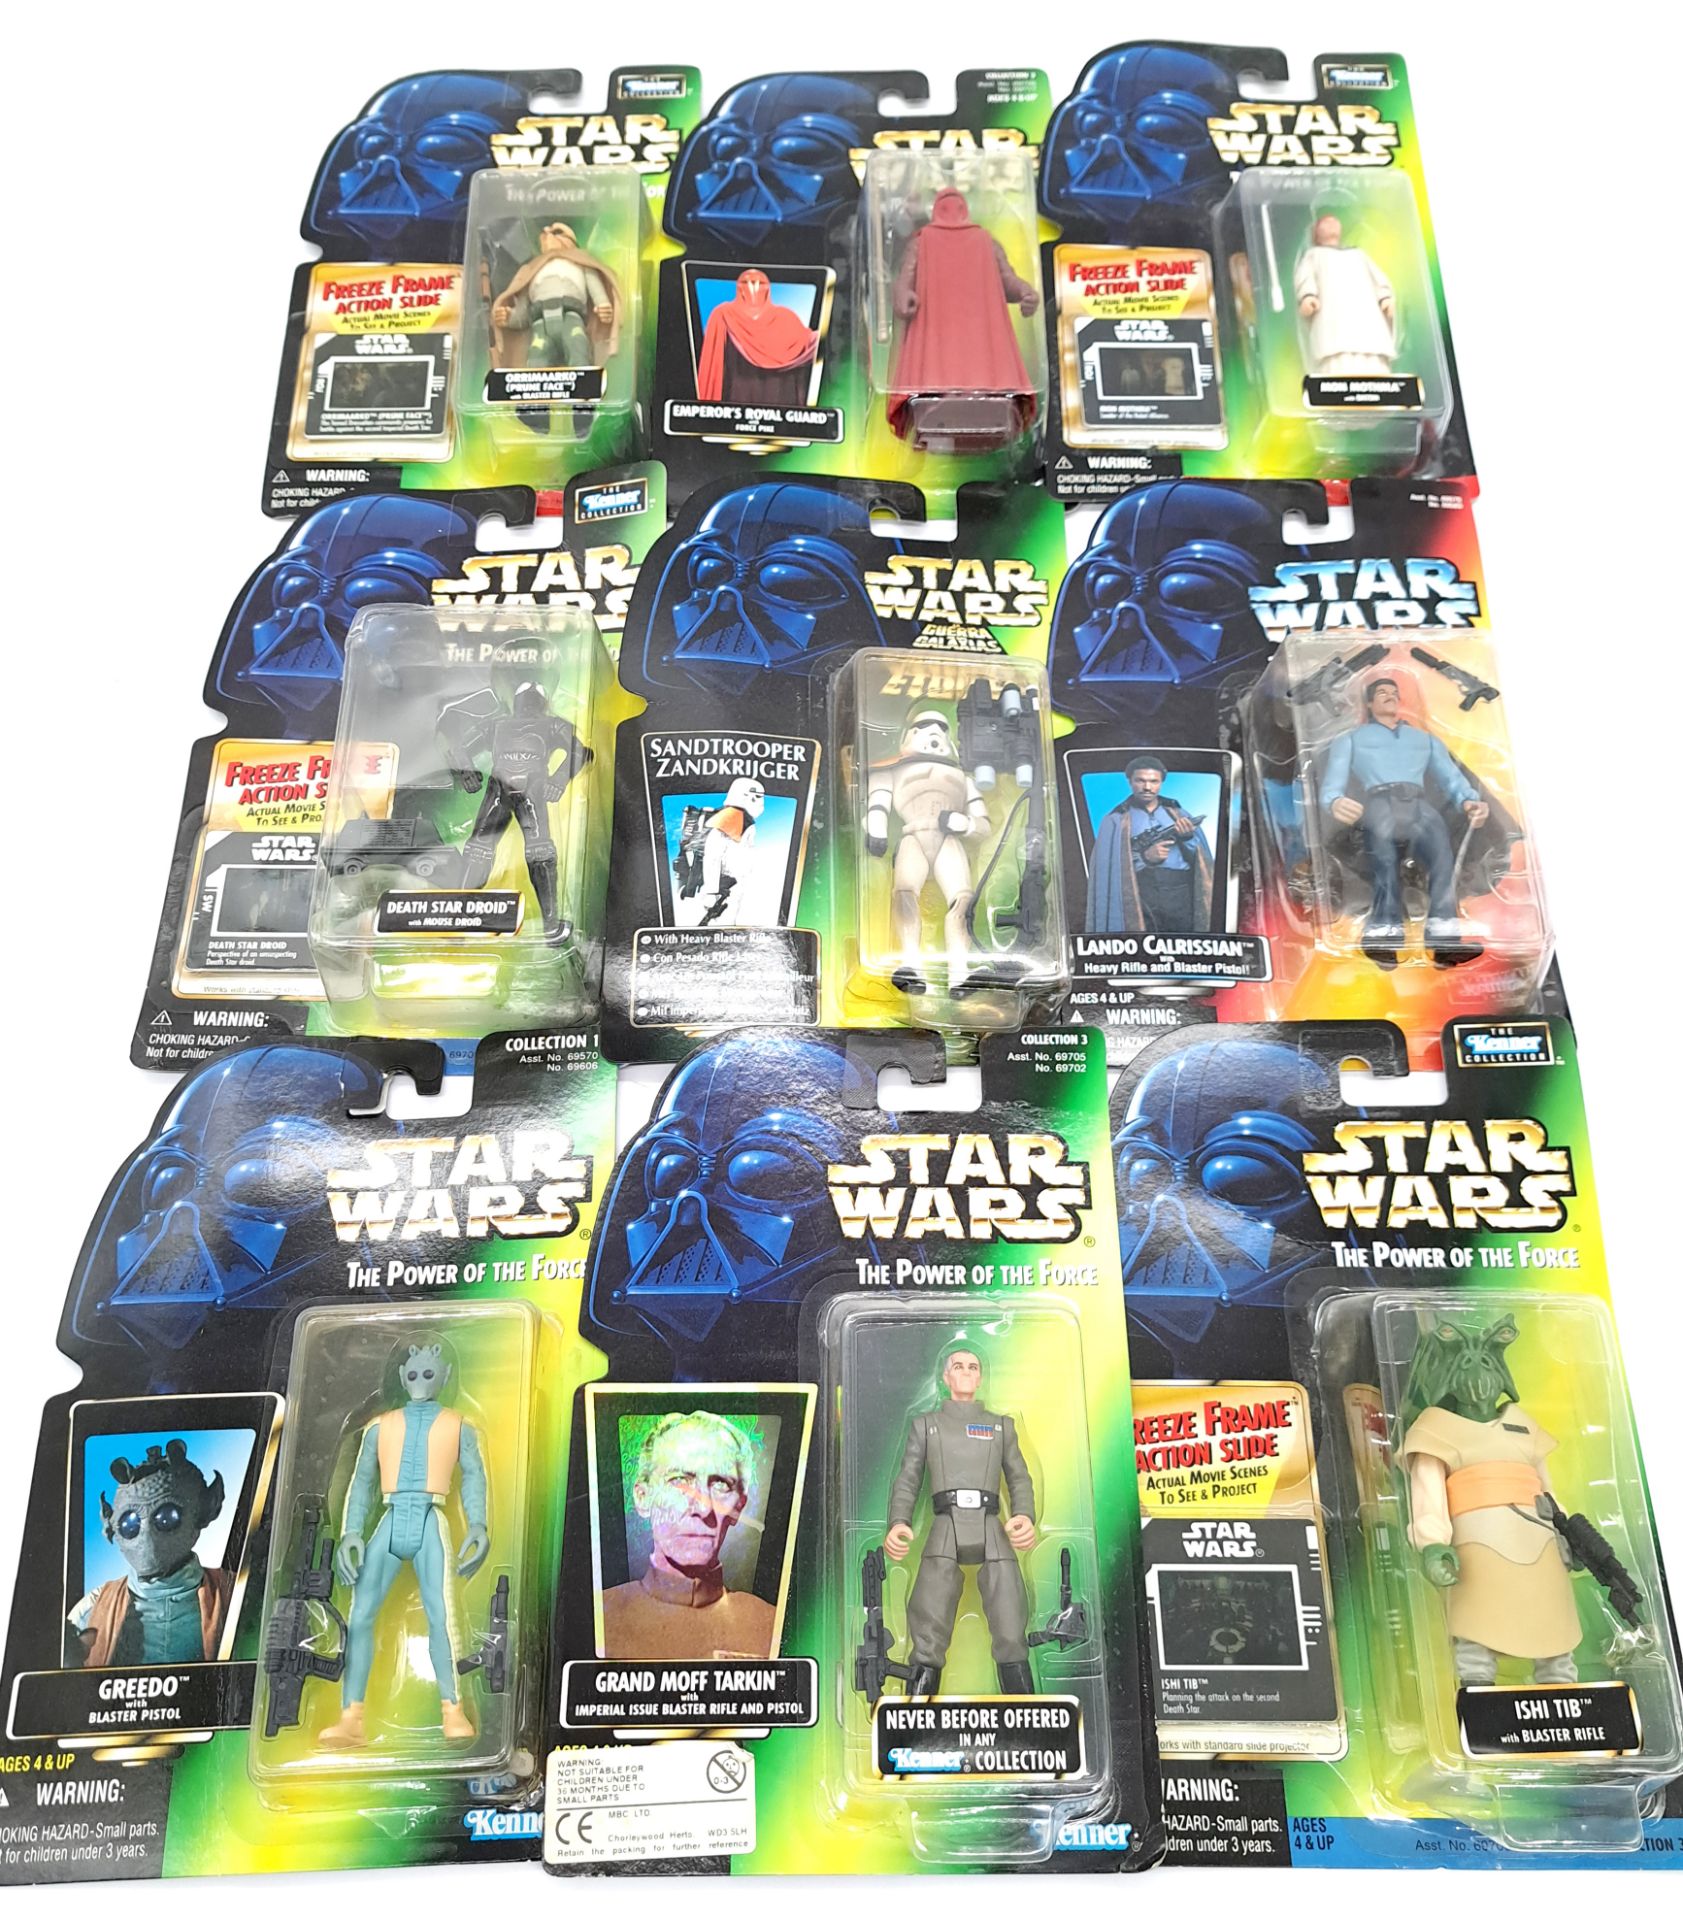 Kenner Power of the Force Star Wars Carded Figures & Hasbro Revenge of the Sith Star Wars Carded ... - Image 2 of 5